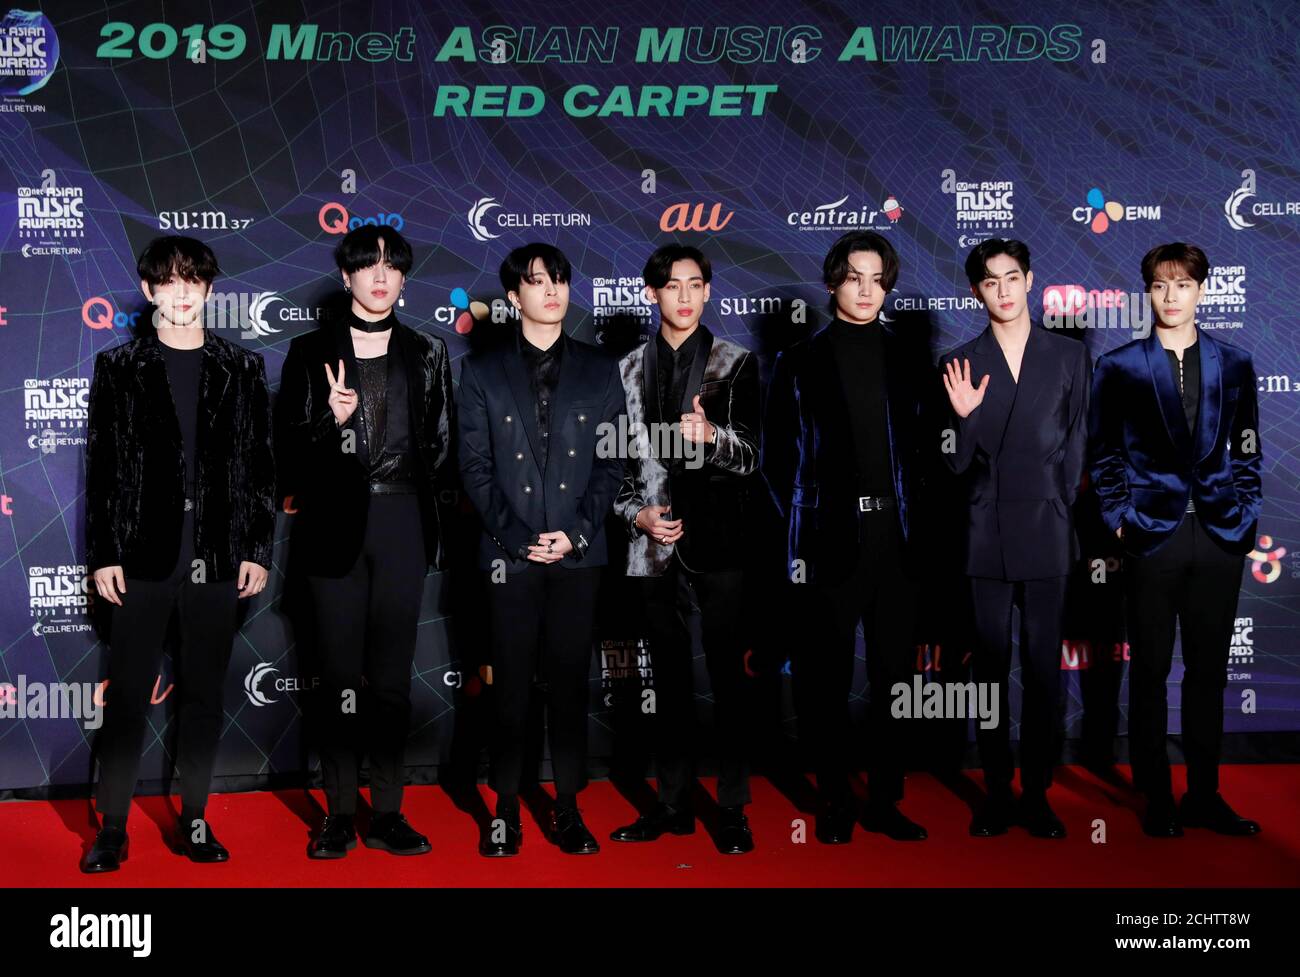 Skyldig Fascinate Delegeret Members of South Korean boy band GOT7 pose on the red carpet during the  annual MAMA Awards at Nagoya Dome in Nagoya, Japan, December 4, 2019.  REUTERS/Kim Kyung-Hoon Stock Photo - Alamy